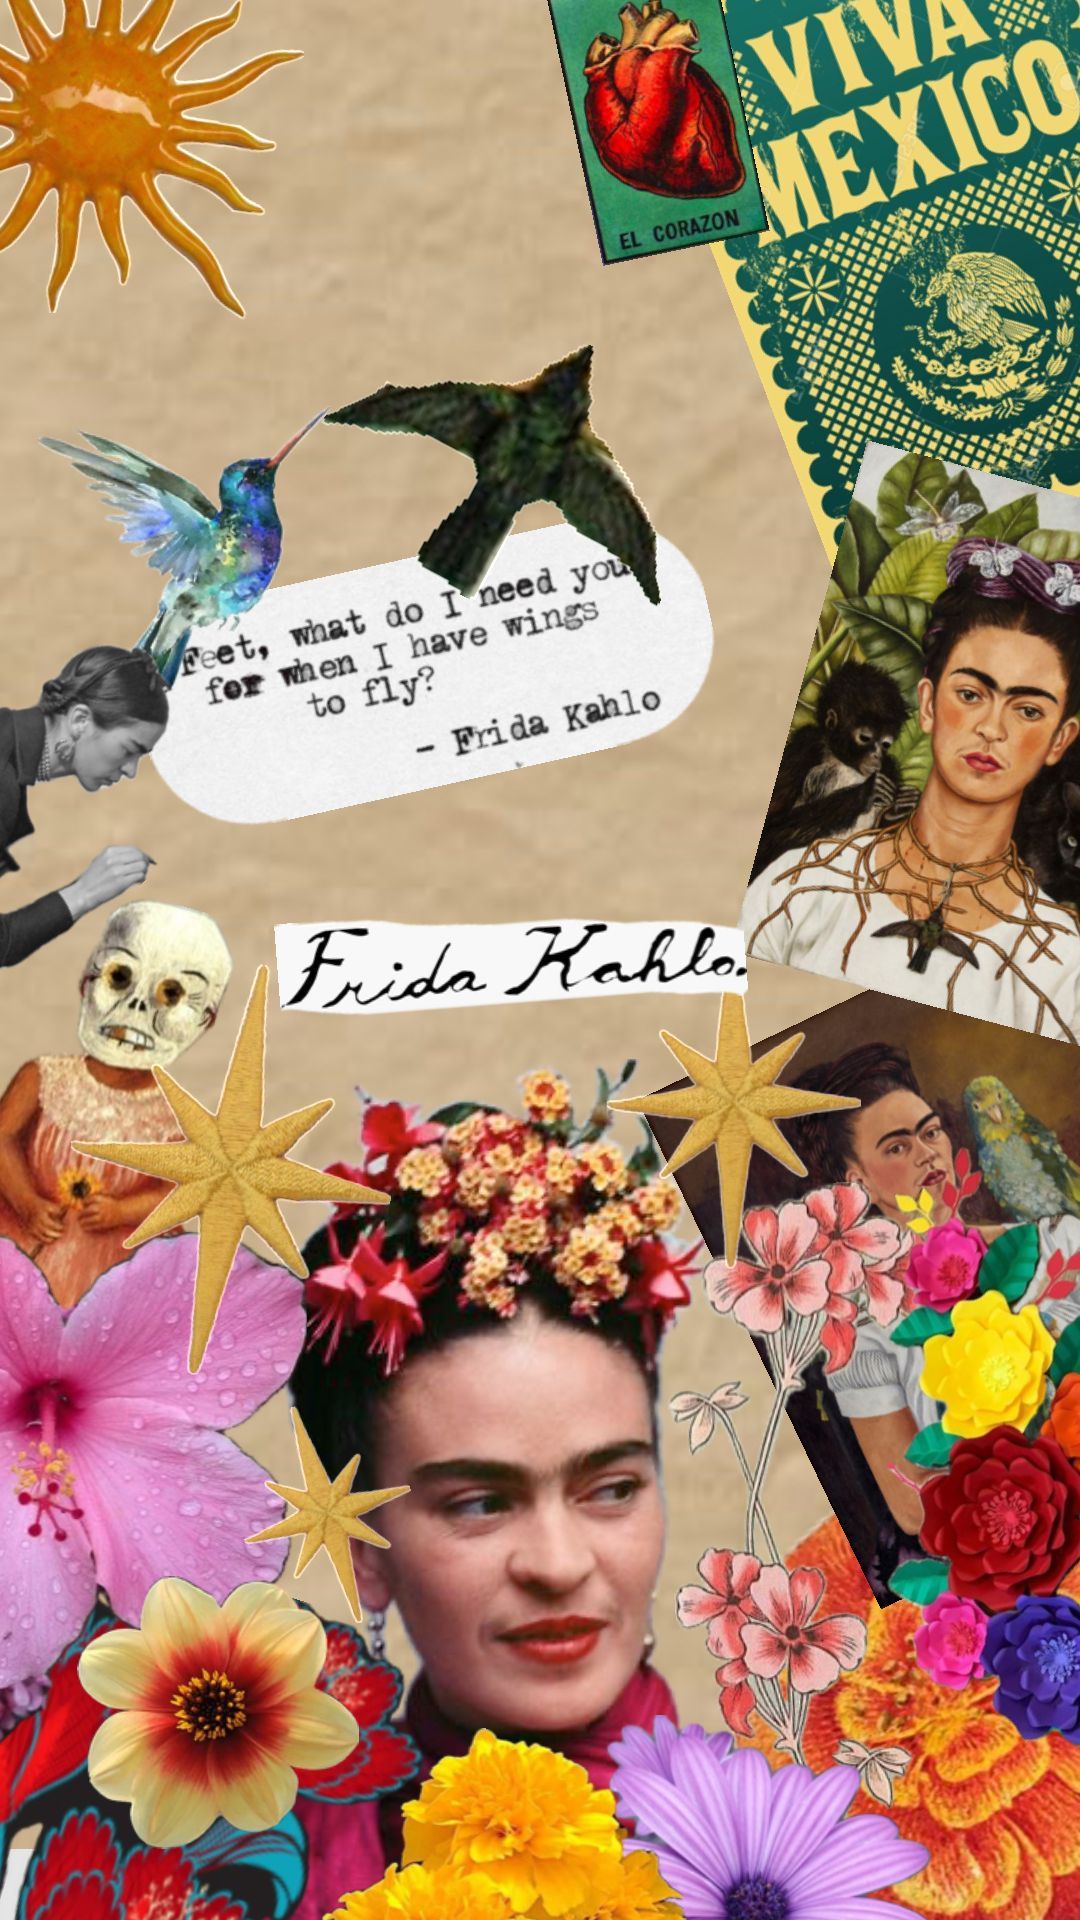 IPhone wallpaper Frida Kahlo with high-resolution 1080x1920 pixel. You can use this wallpaper for your iPhone 5, 6, 7, 8, X, XS, XR backgrounds, Mobile Screensaver, or iPad Lock Screen - Frida Kahlo